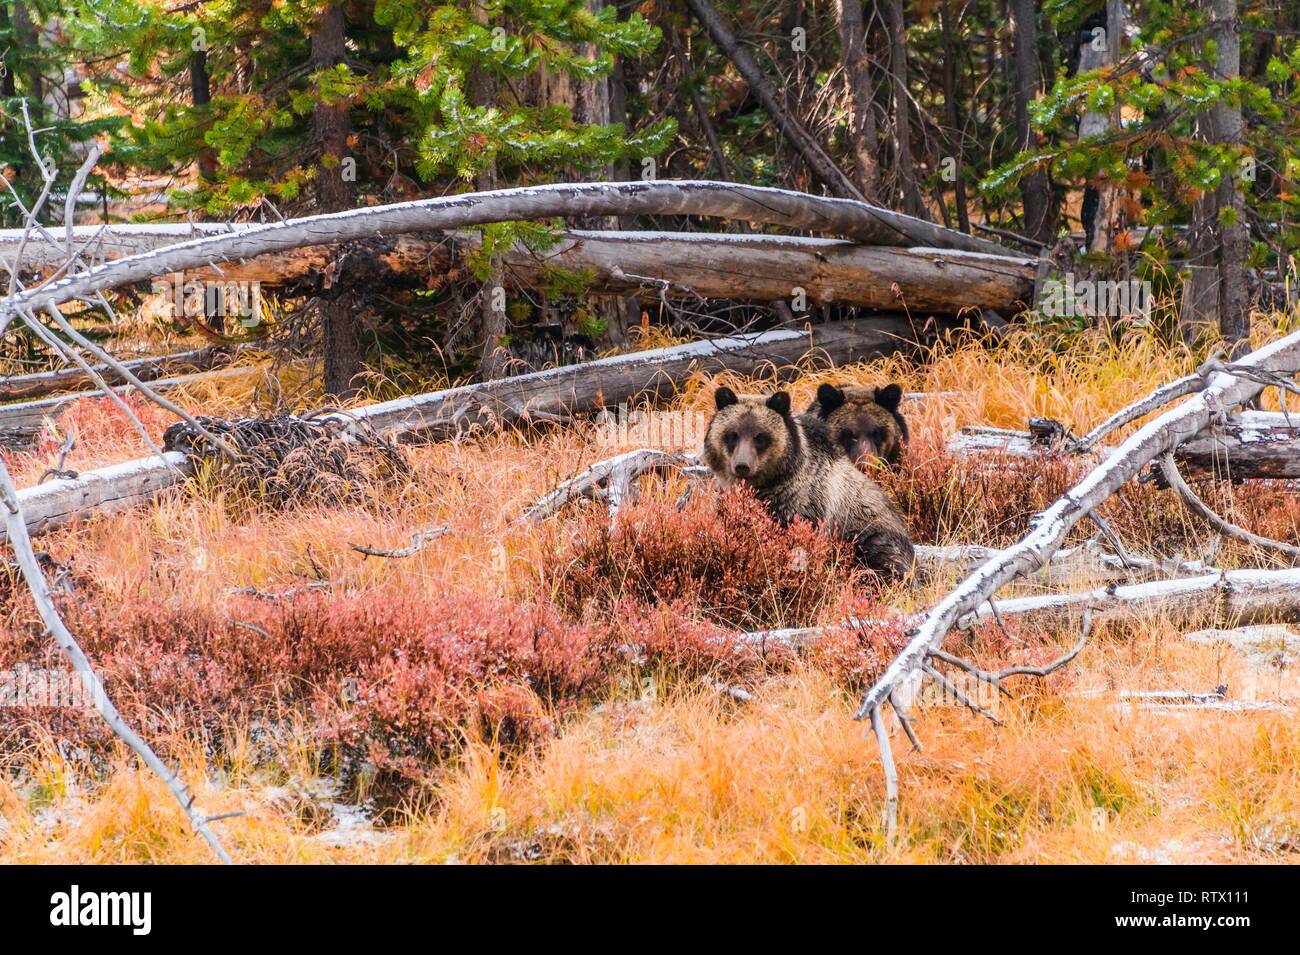 Two Grizzly bears (Ursus arctos horribilis), young animals sitting in bushes in autumn, Yellowstone National Park, Wyoming, USA Stock Photo